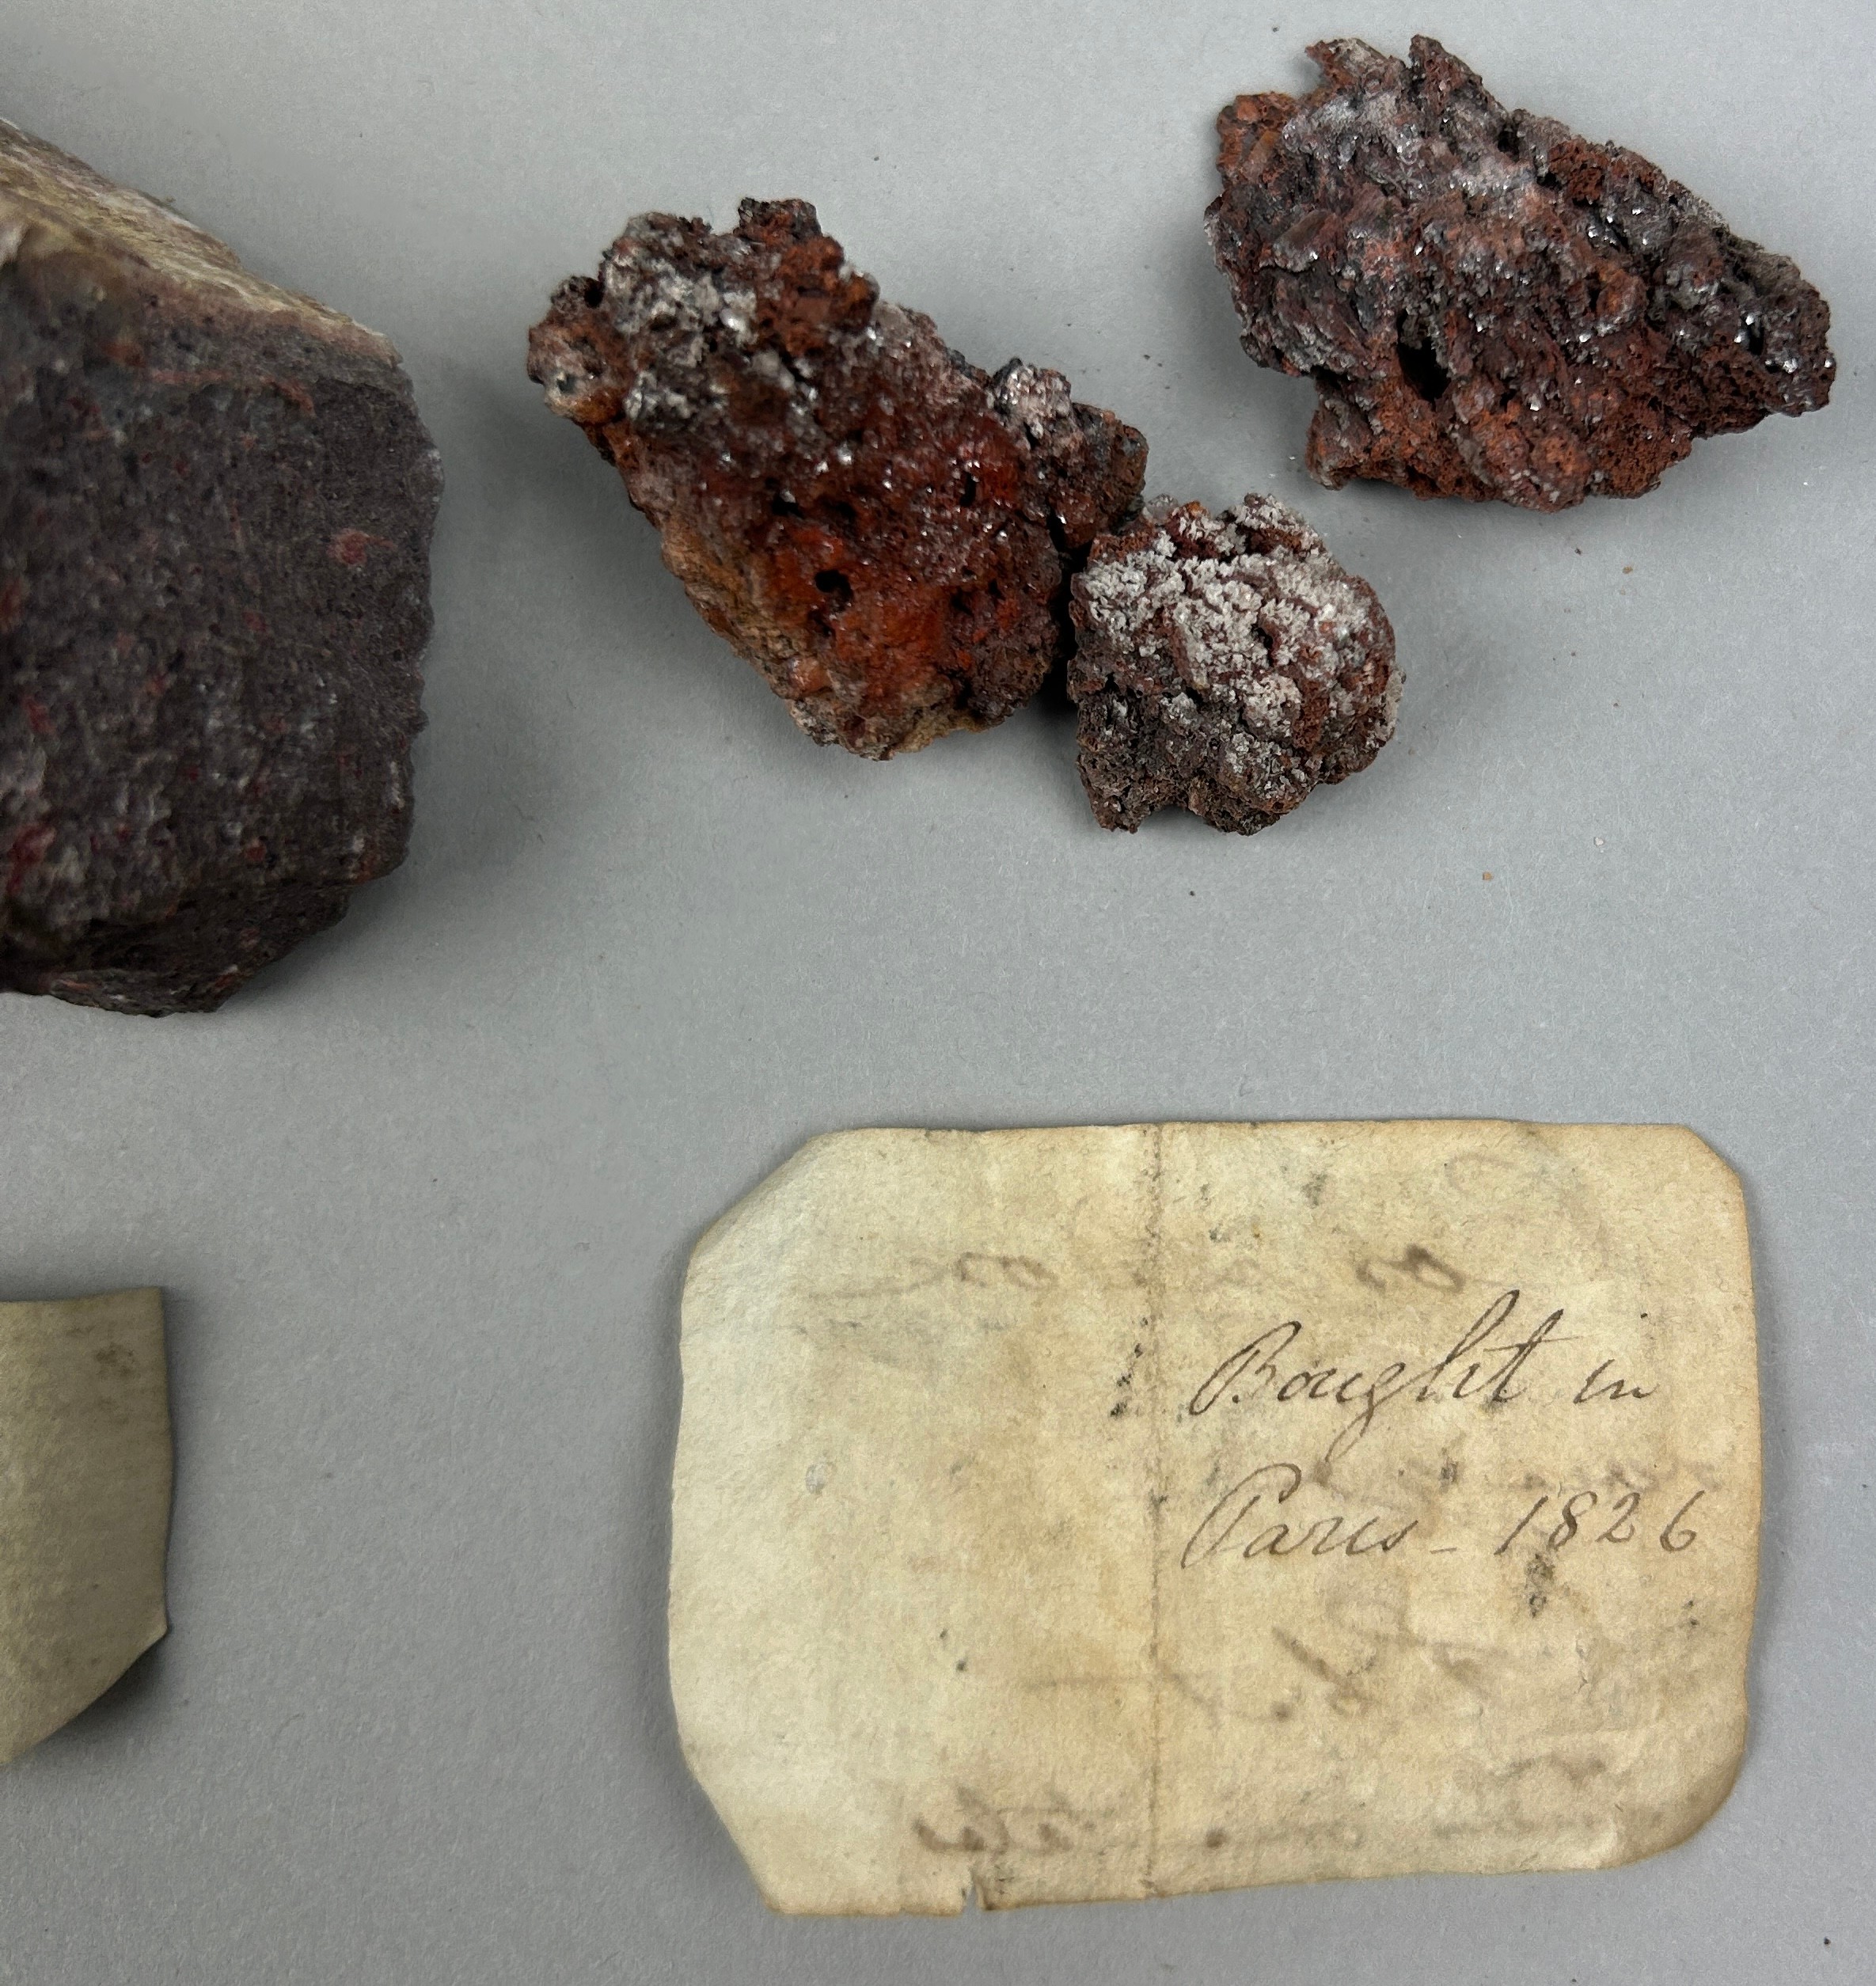 A RARE CABINET COLLECTION OF MINERALS CIRCA 1810-1860, including labels for some very important - Image 10 of 30